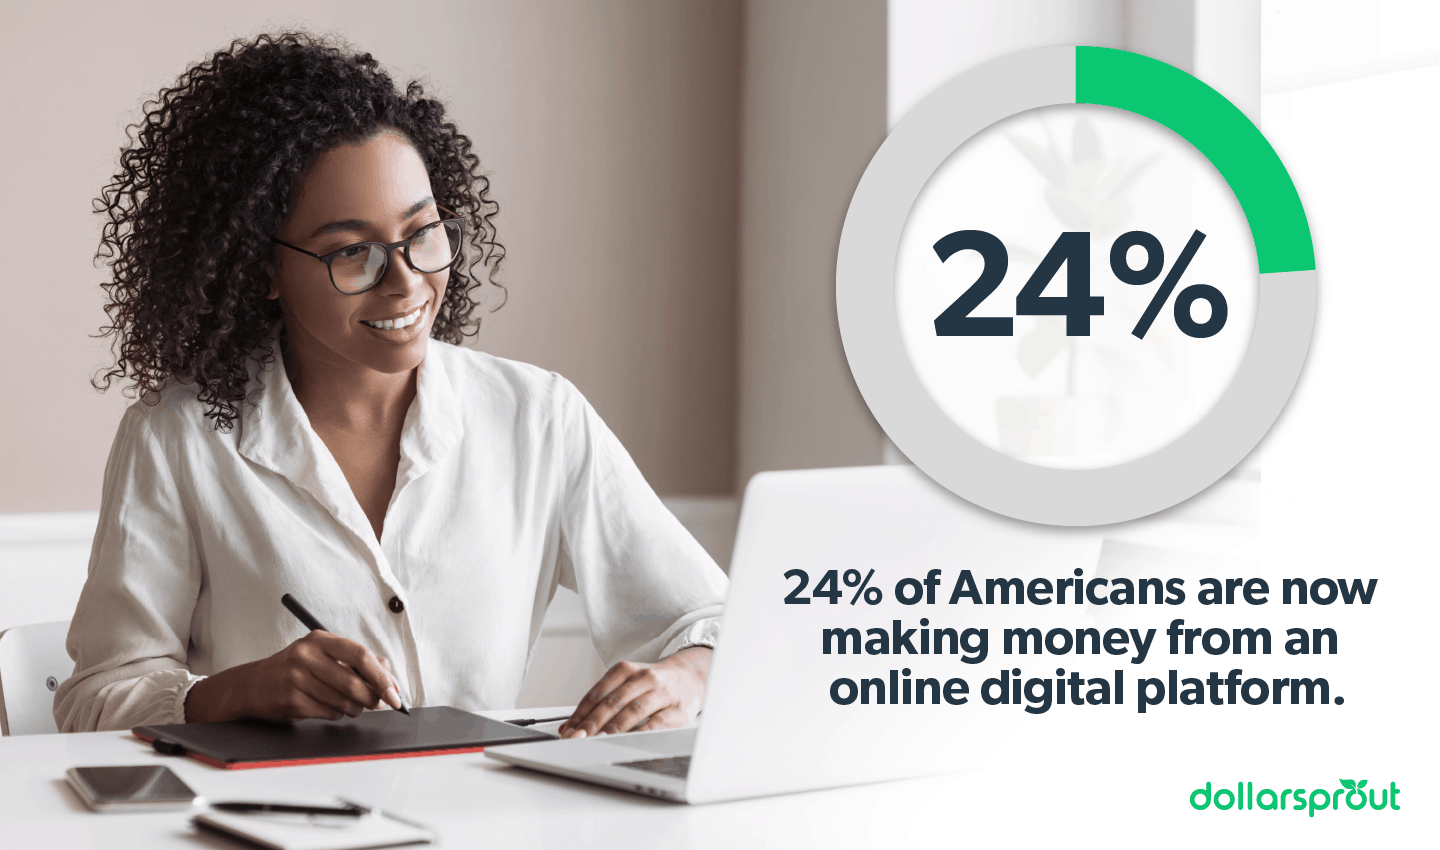 Percent of Americans making money online